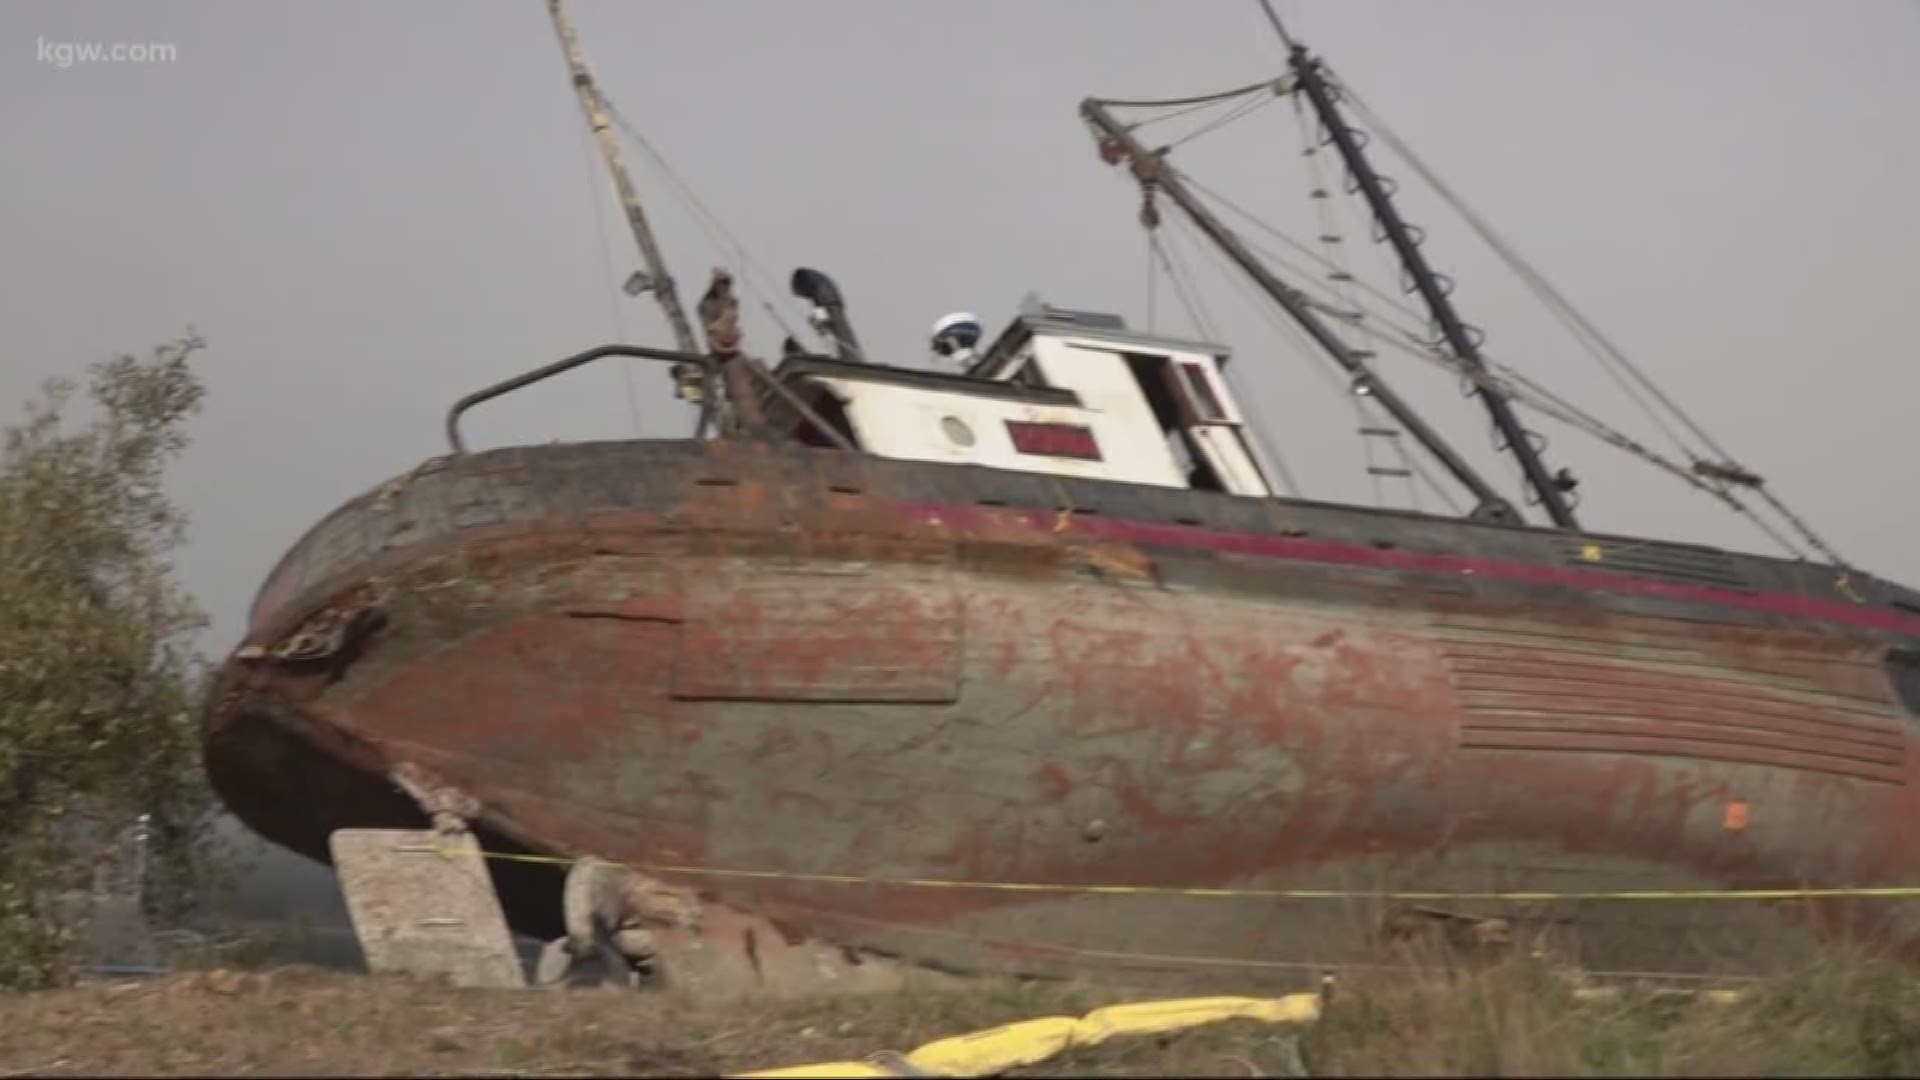 The boat sank at the Port of Garibaldi last month. Now it's set to be scrapped after being pulled to shore.